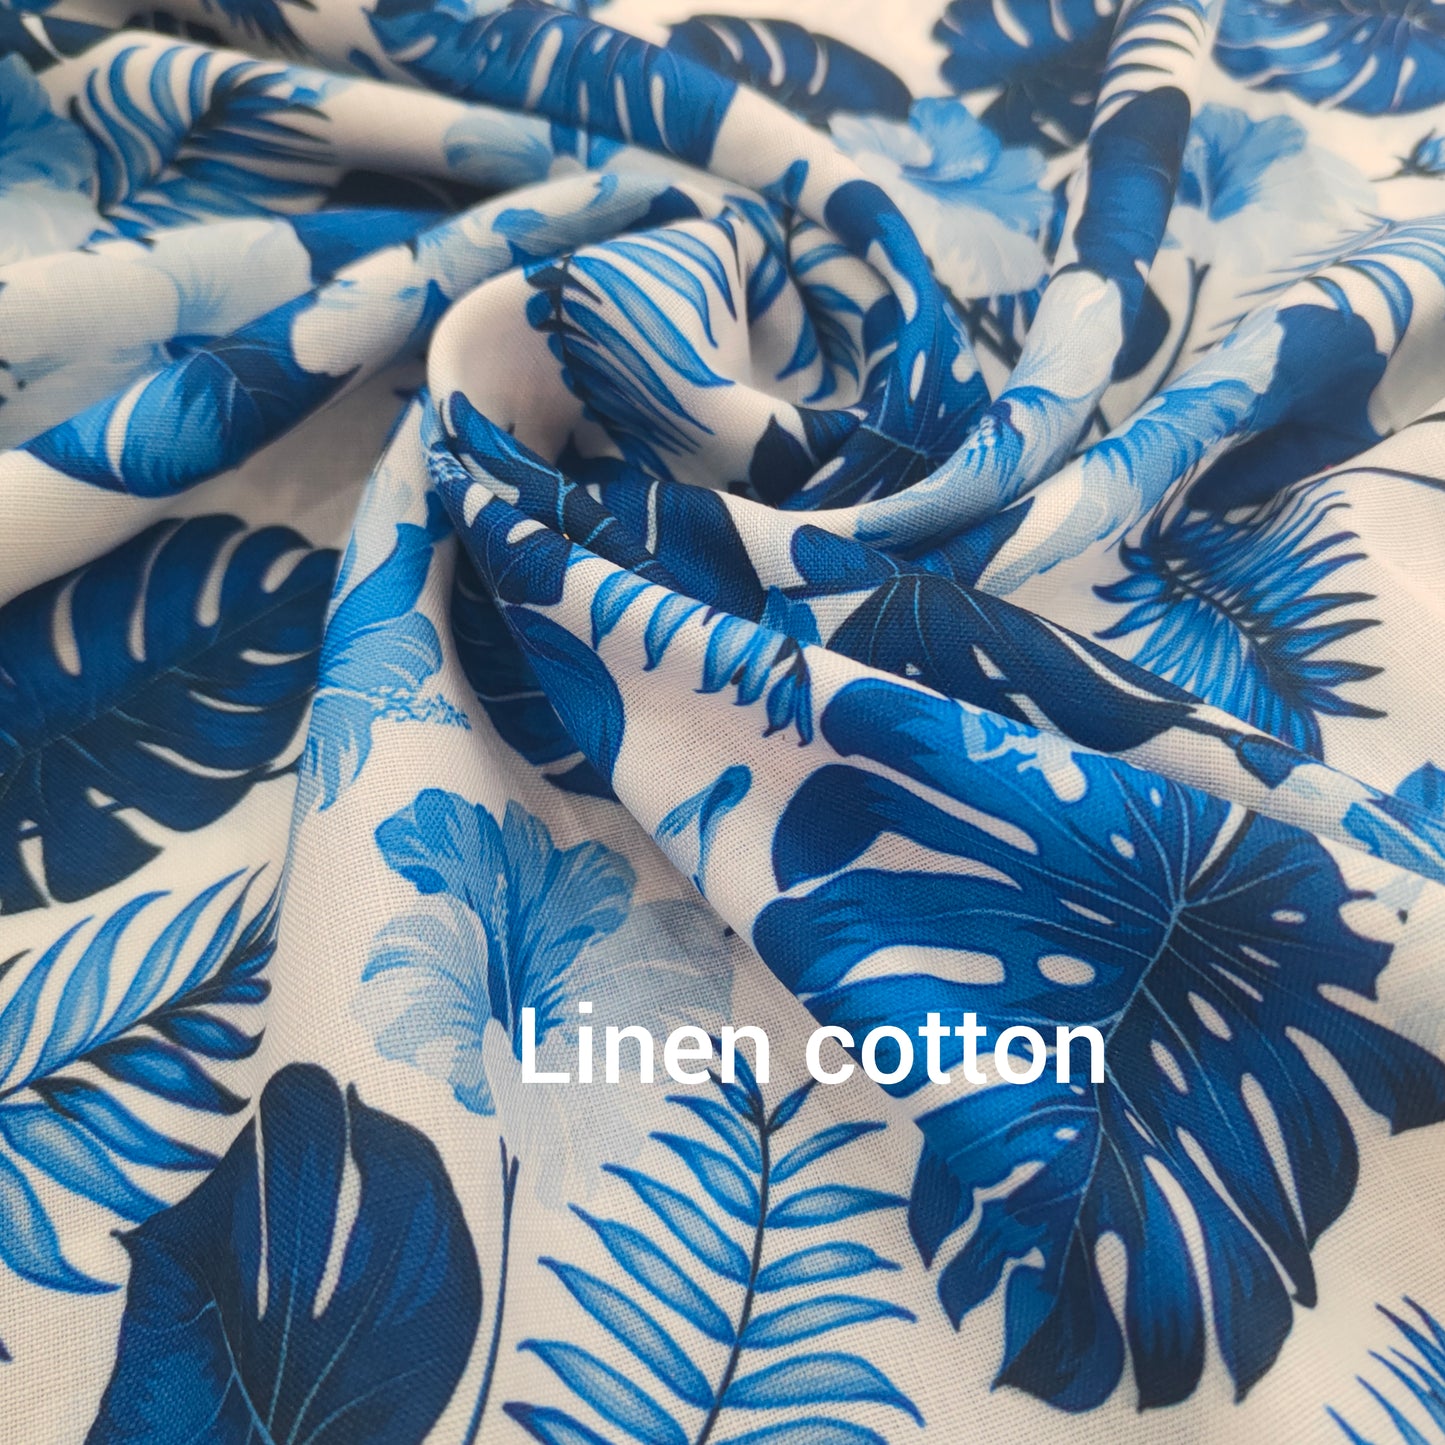 Linen Cotton Fabric with Nature Inspired Prints in Royal Blue